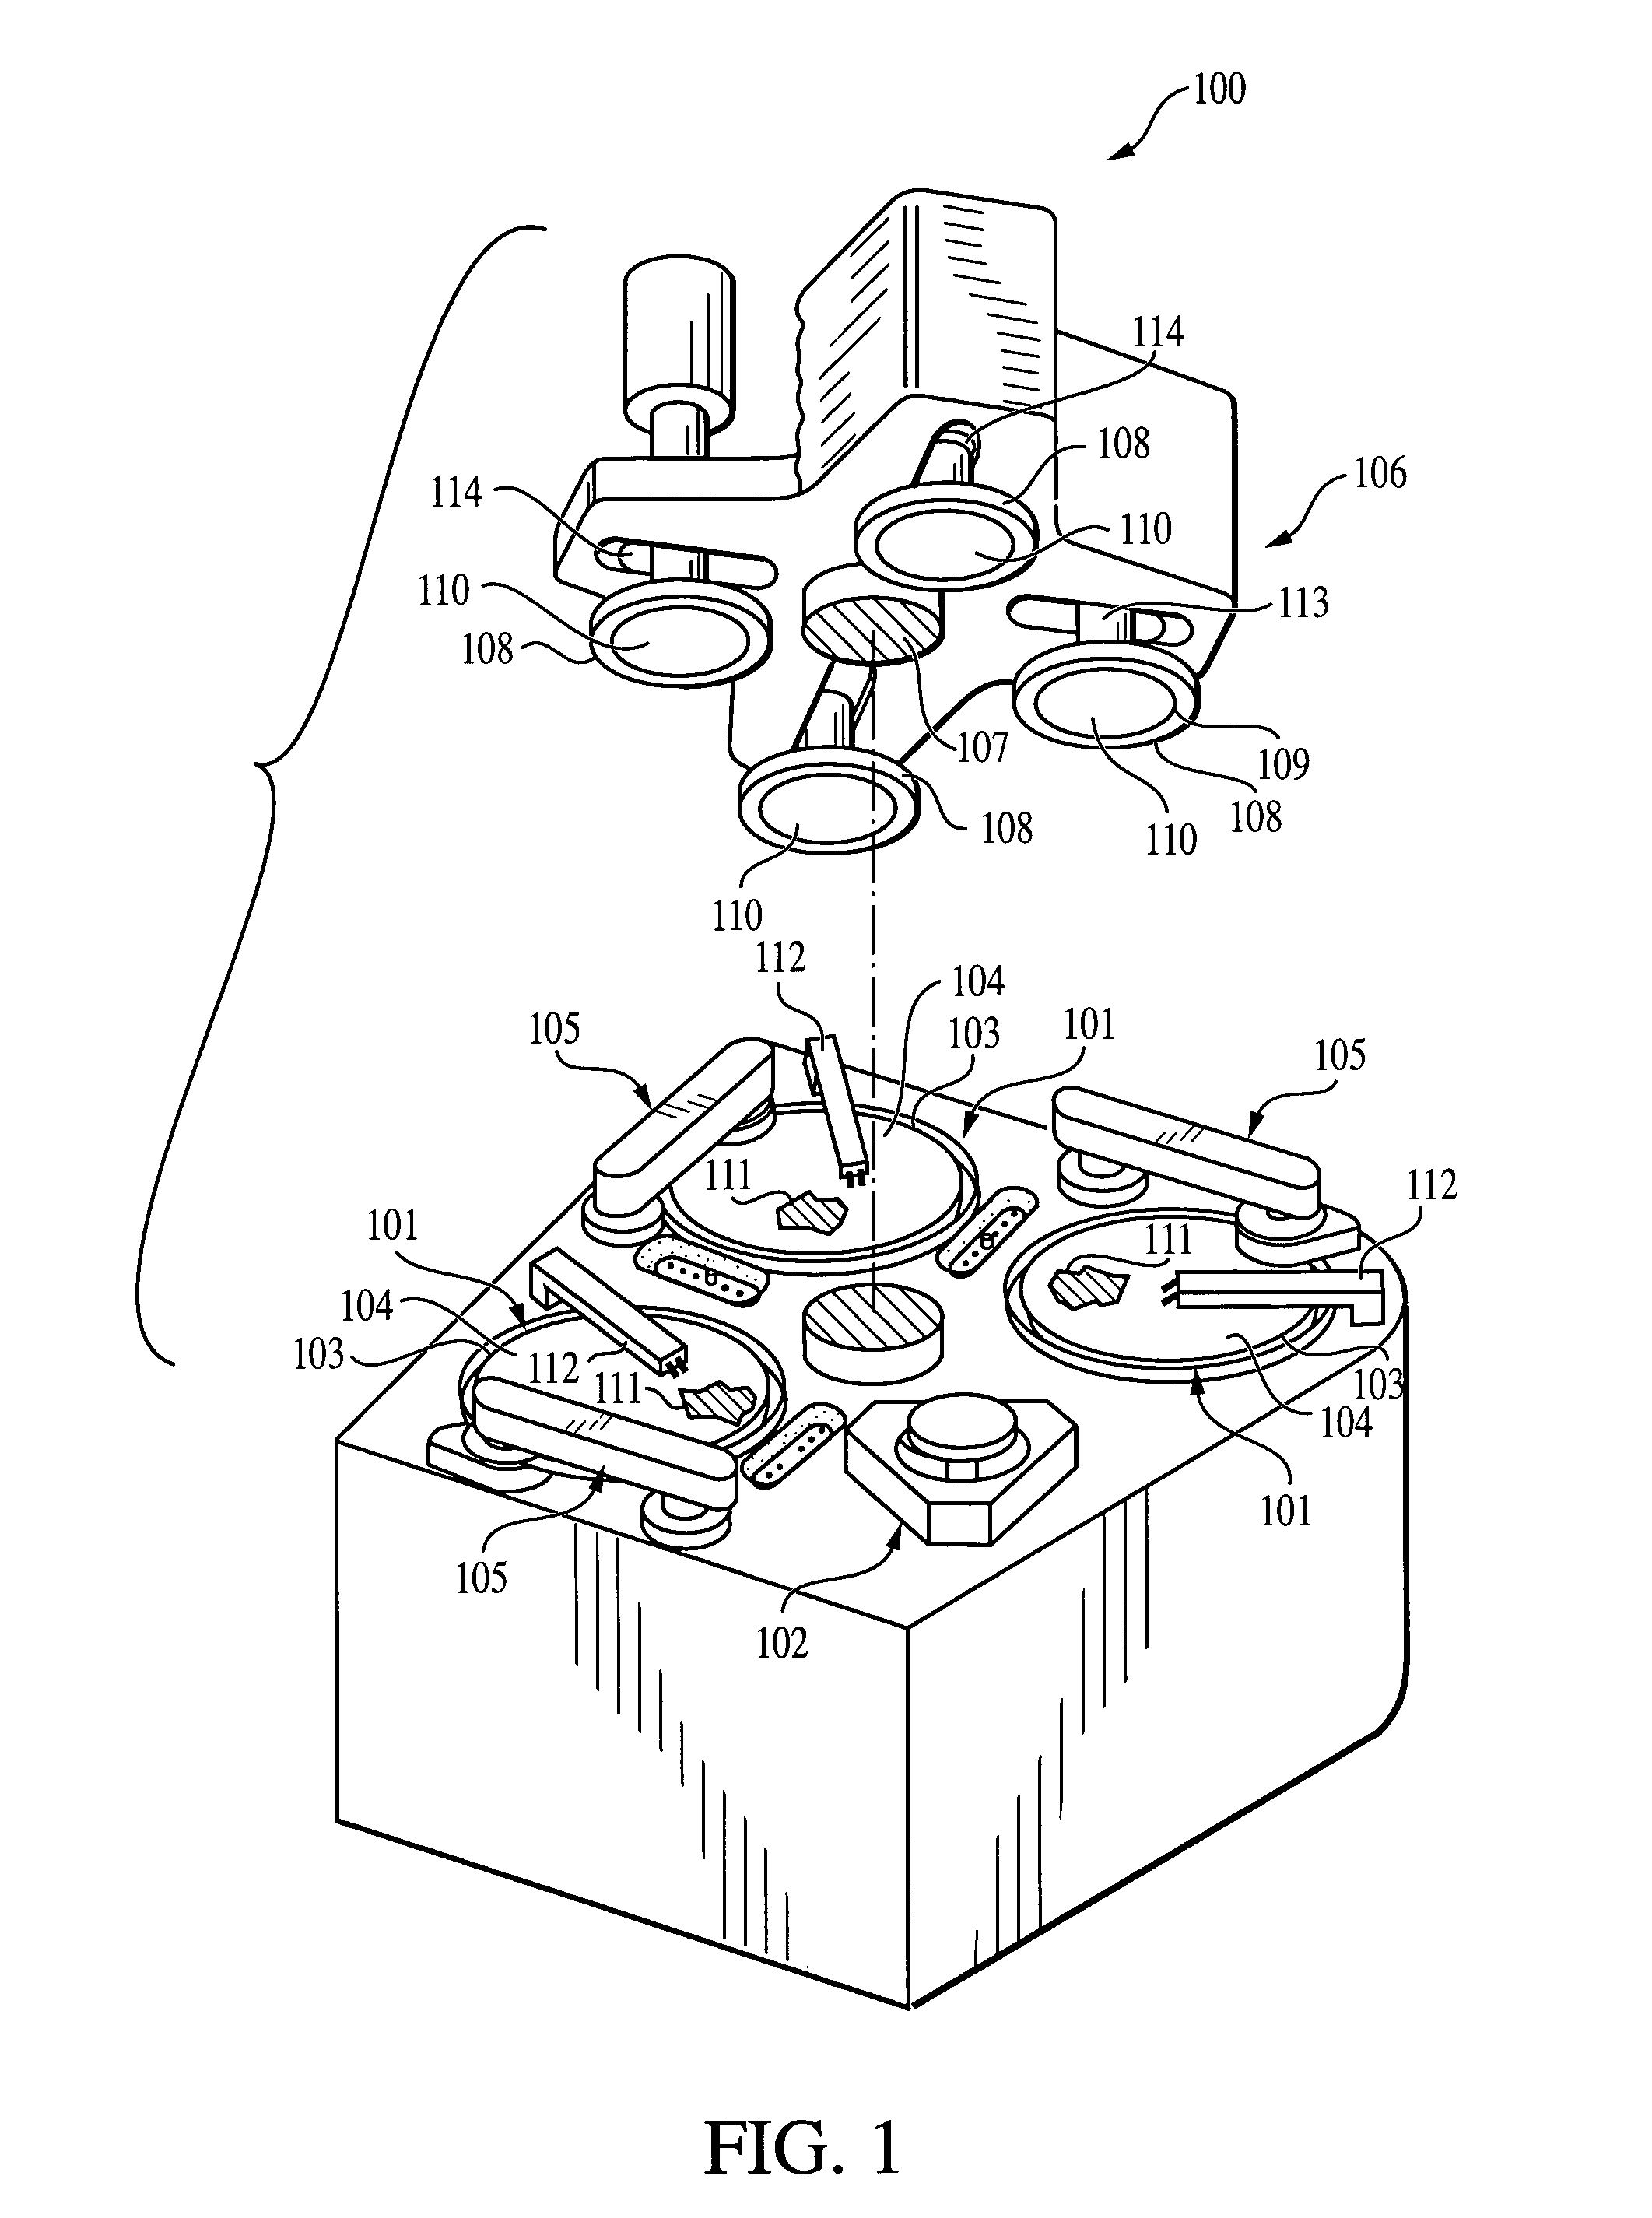 Feedback control of a chemical mechanical polishing device providing manipulation of removal rate profiles